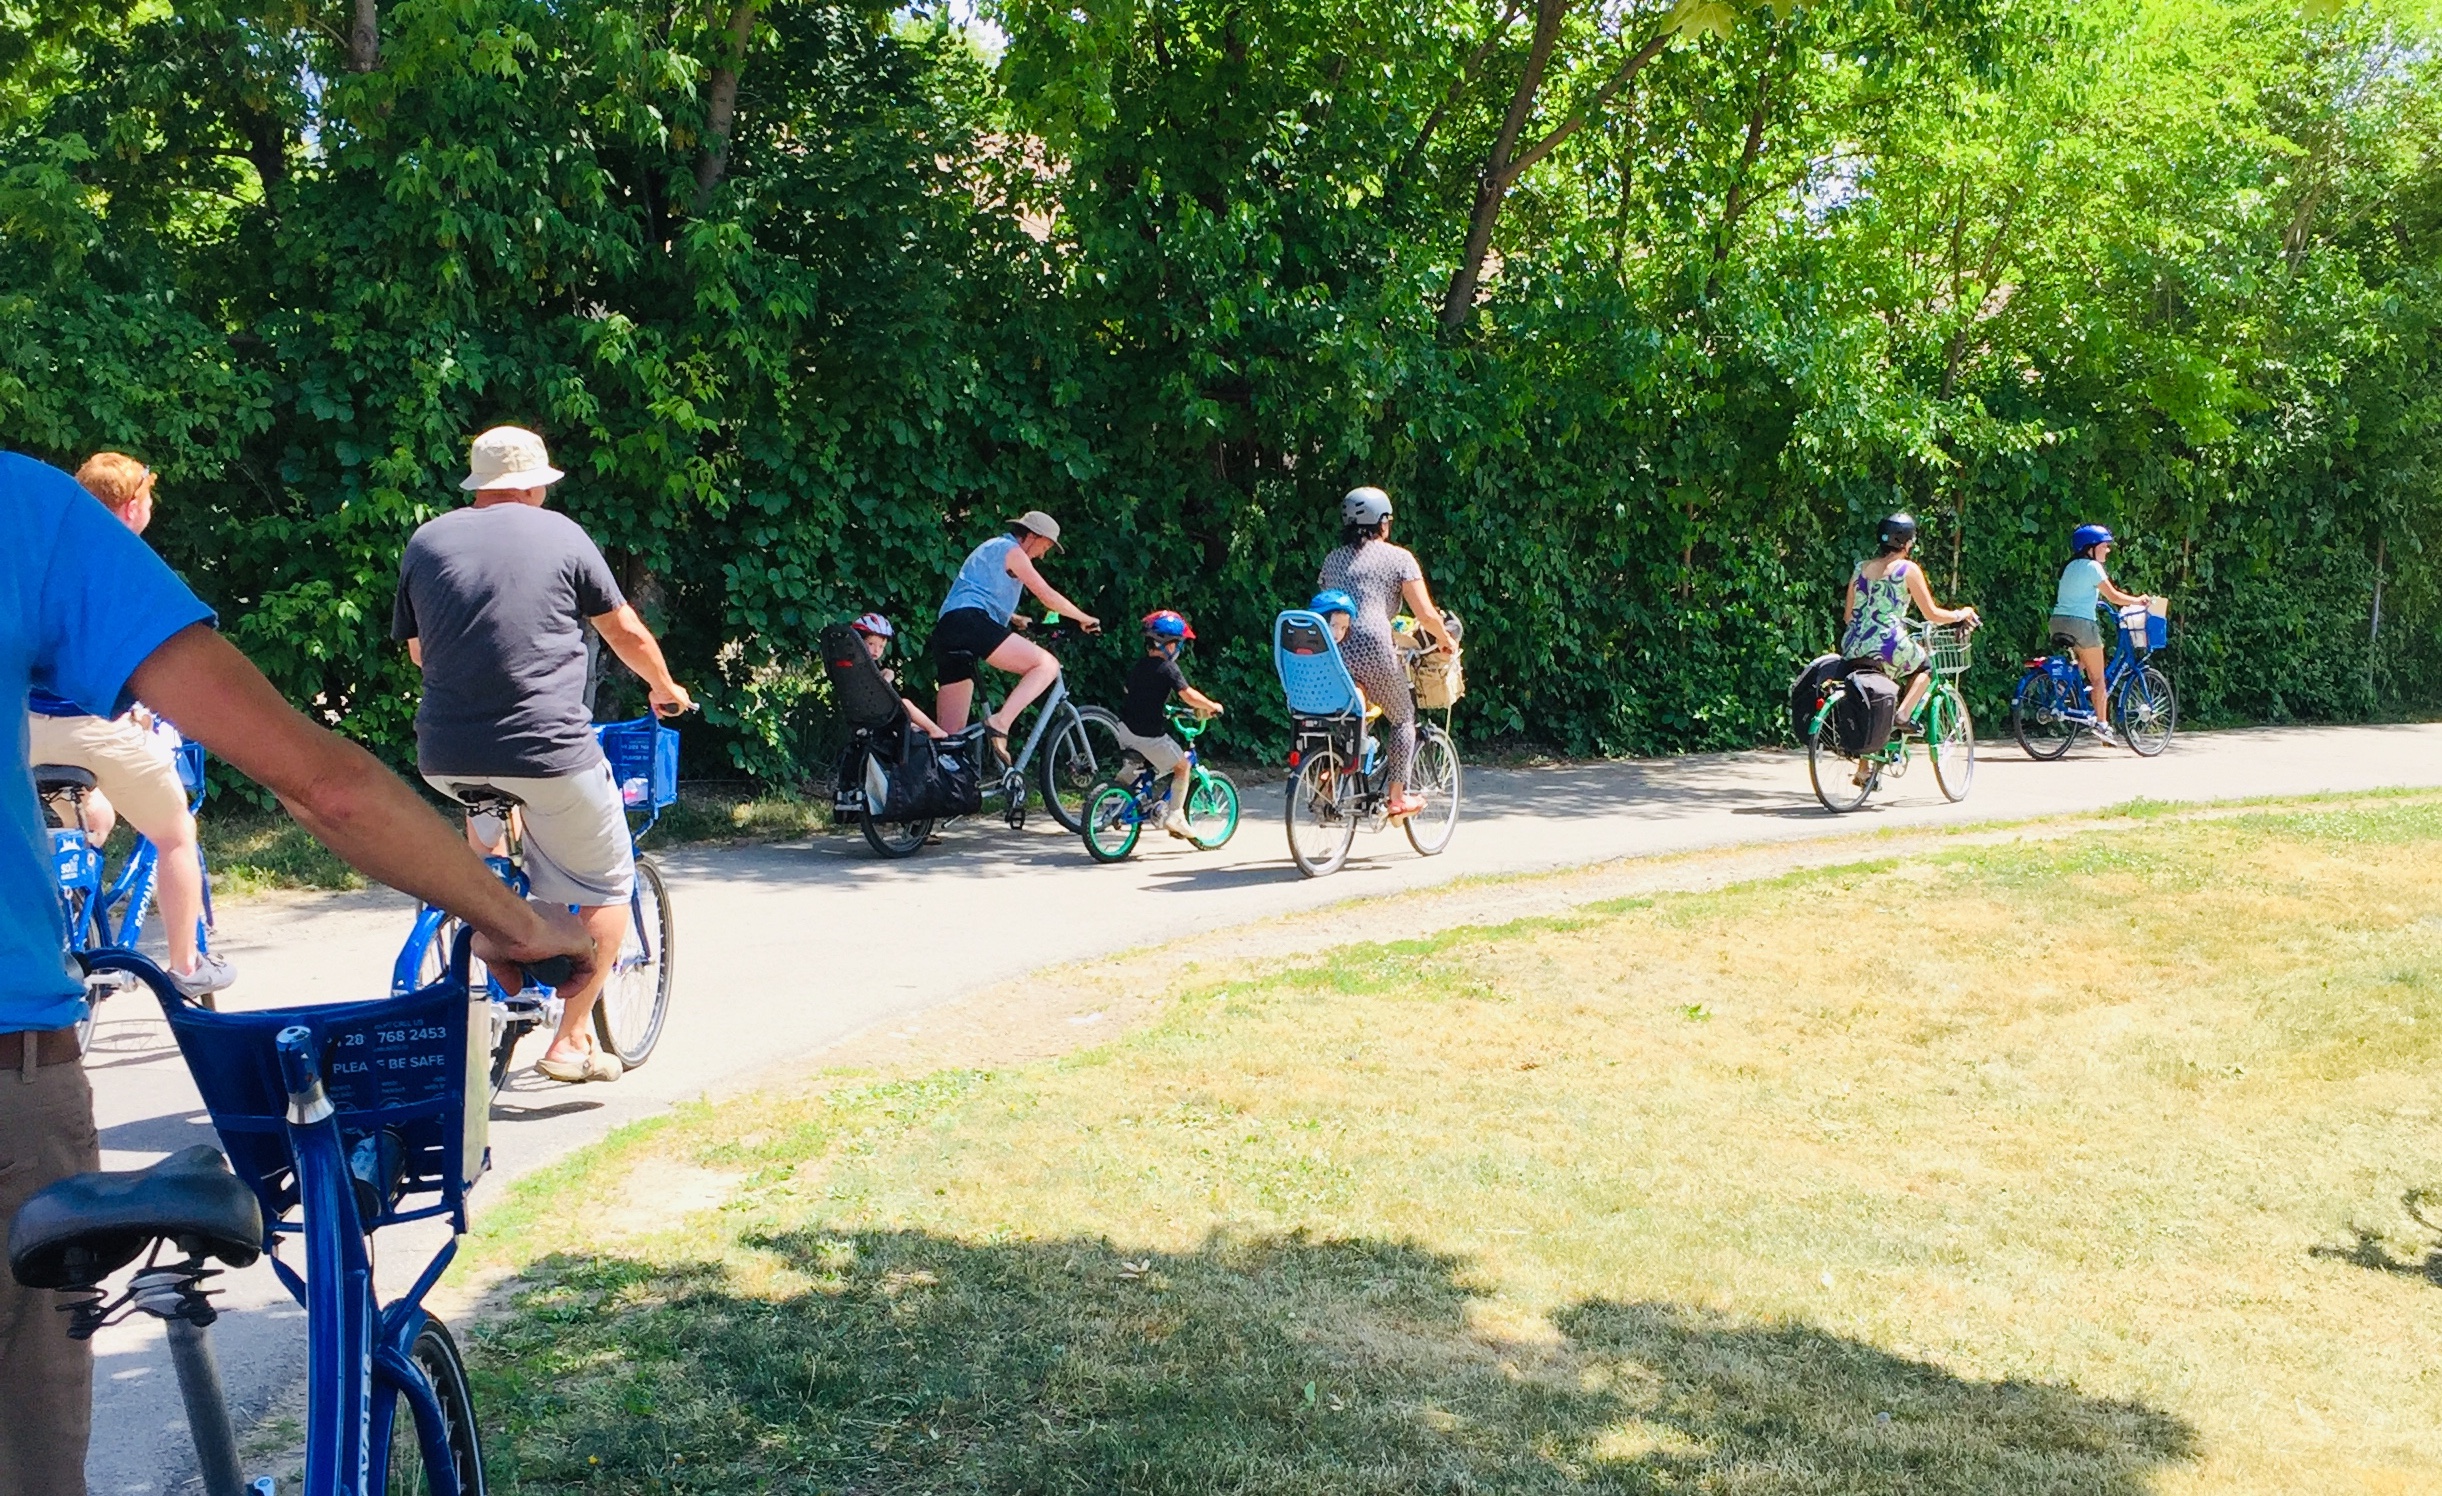 A small group of people cycling on a trail, photographed from behind the group